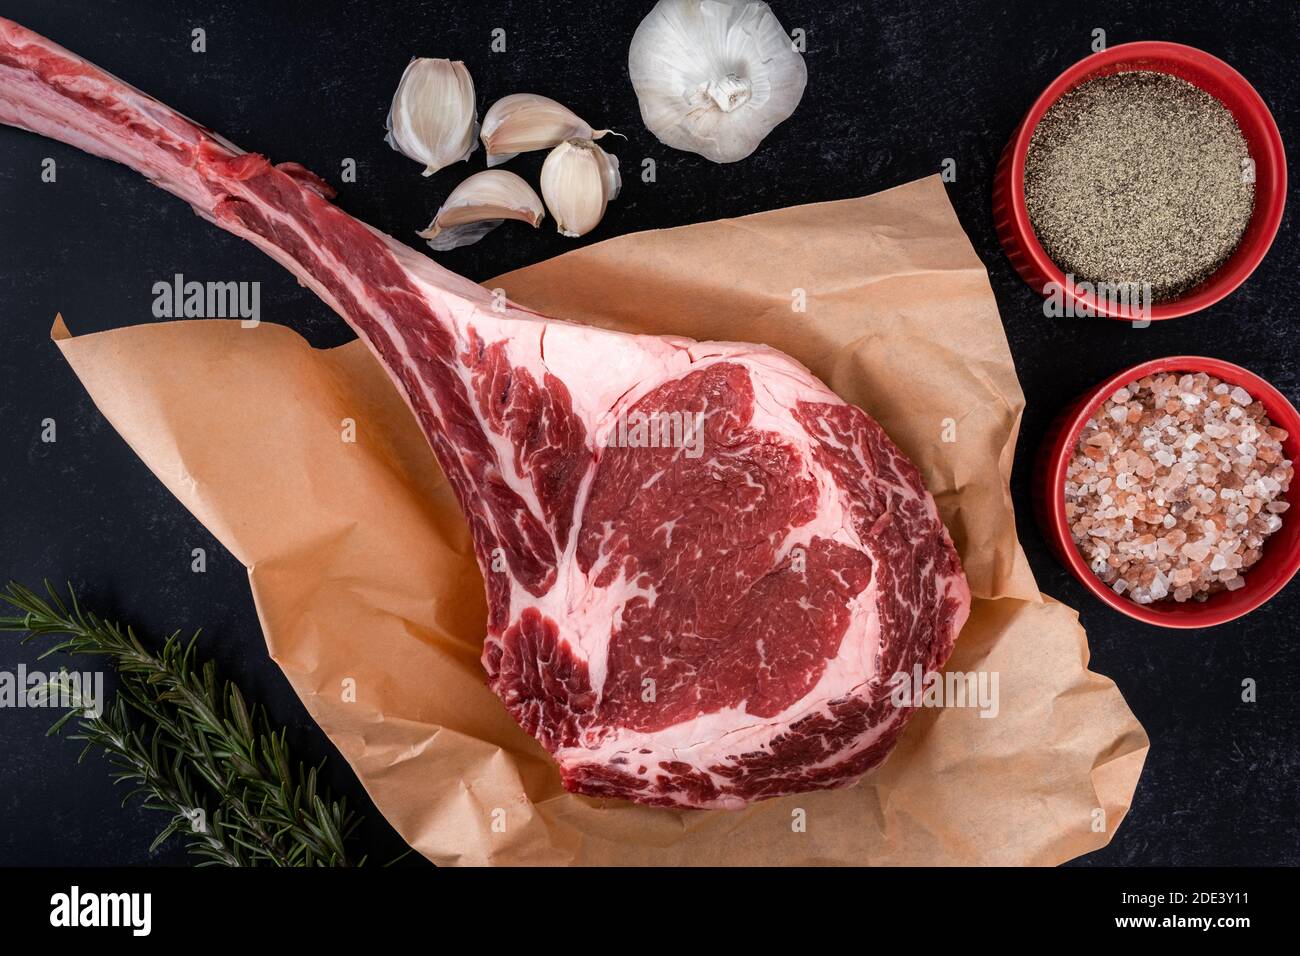 Freshly cut tomahawk ribeye steak with butcher's paper ready to be seasoned with salt and pepper, garlic and rosemary on a countertop Stock Photo